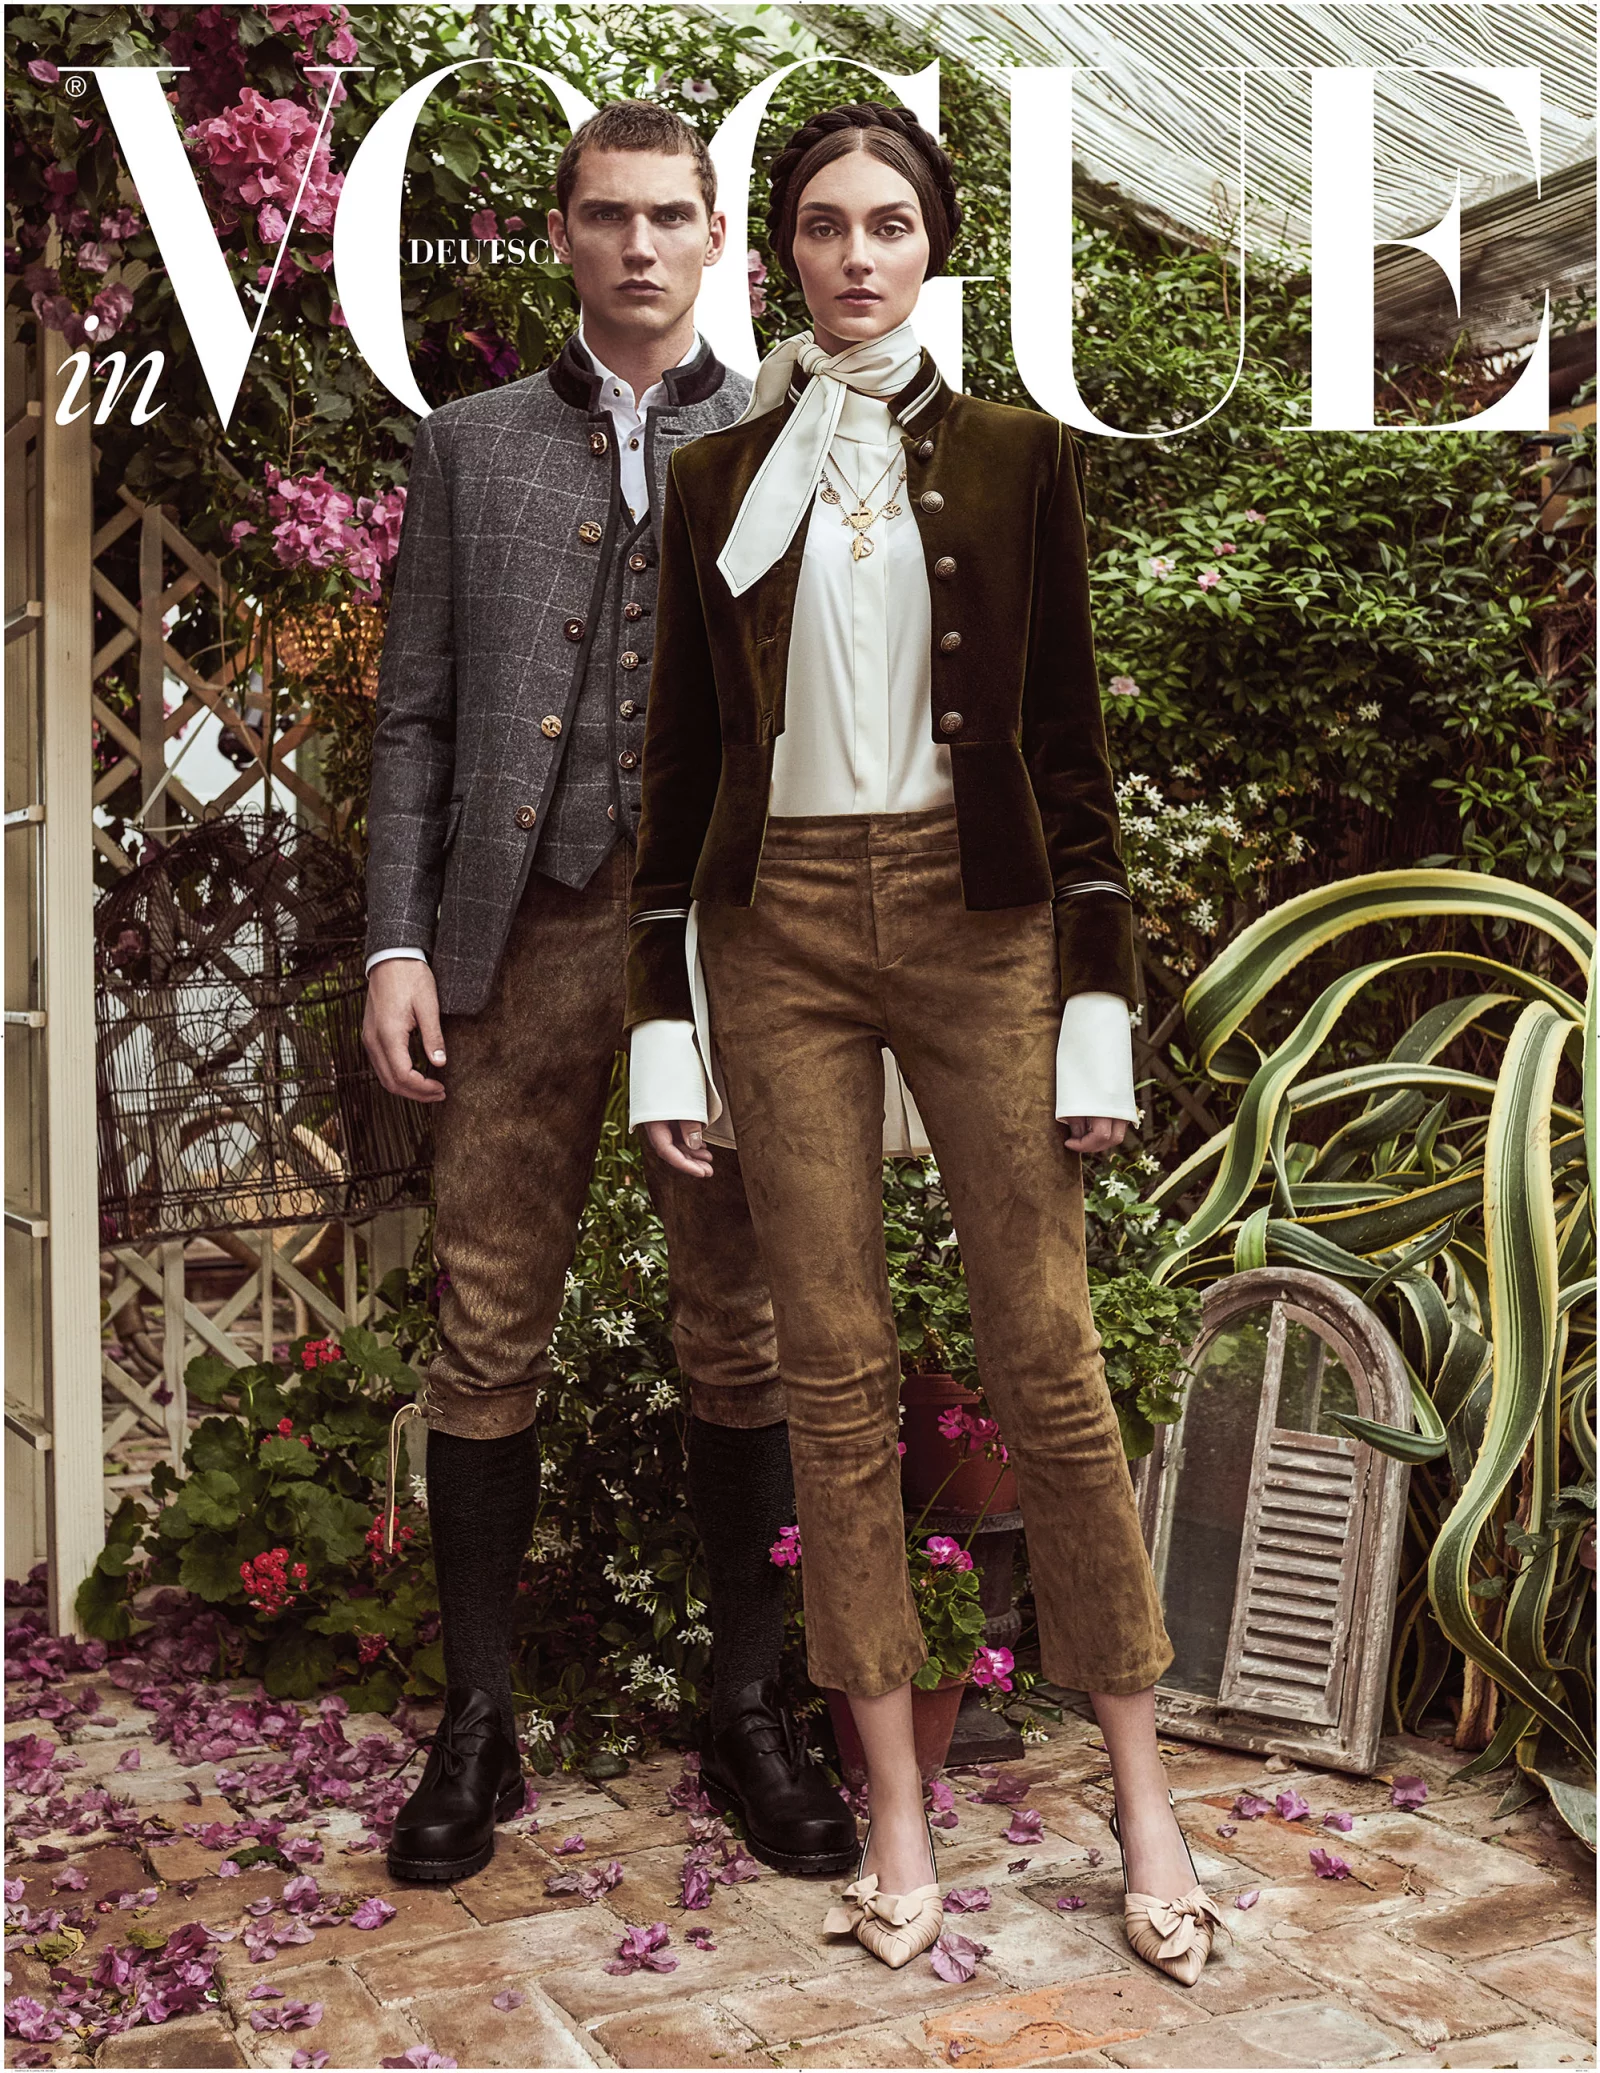 Lodenfrey for Vogue Germany 7 by Andreas ORTNER